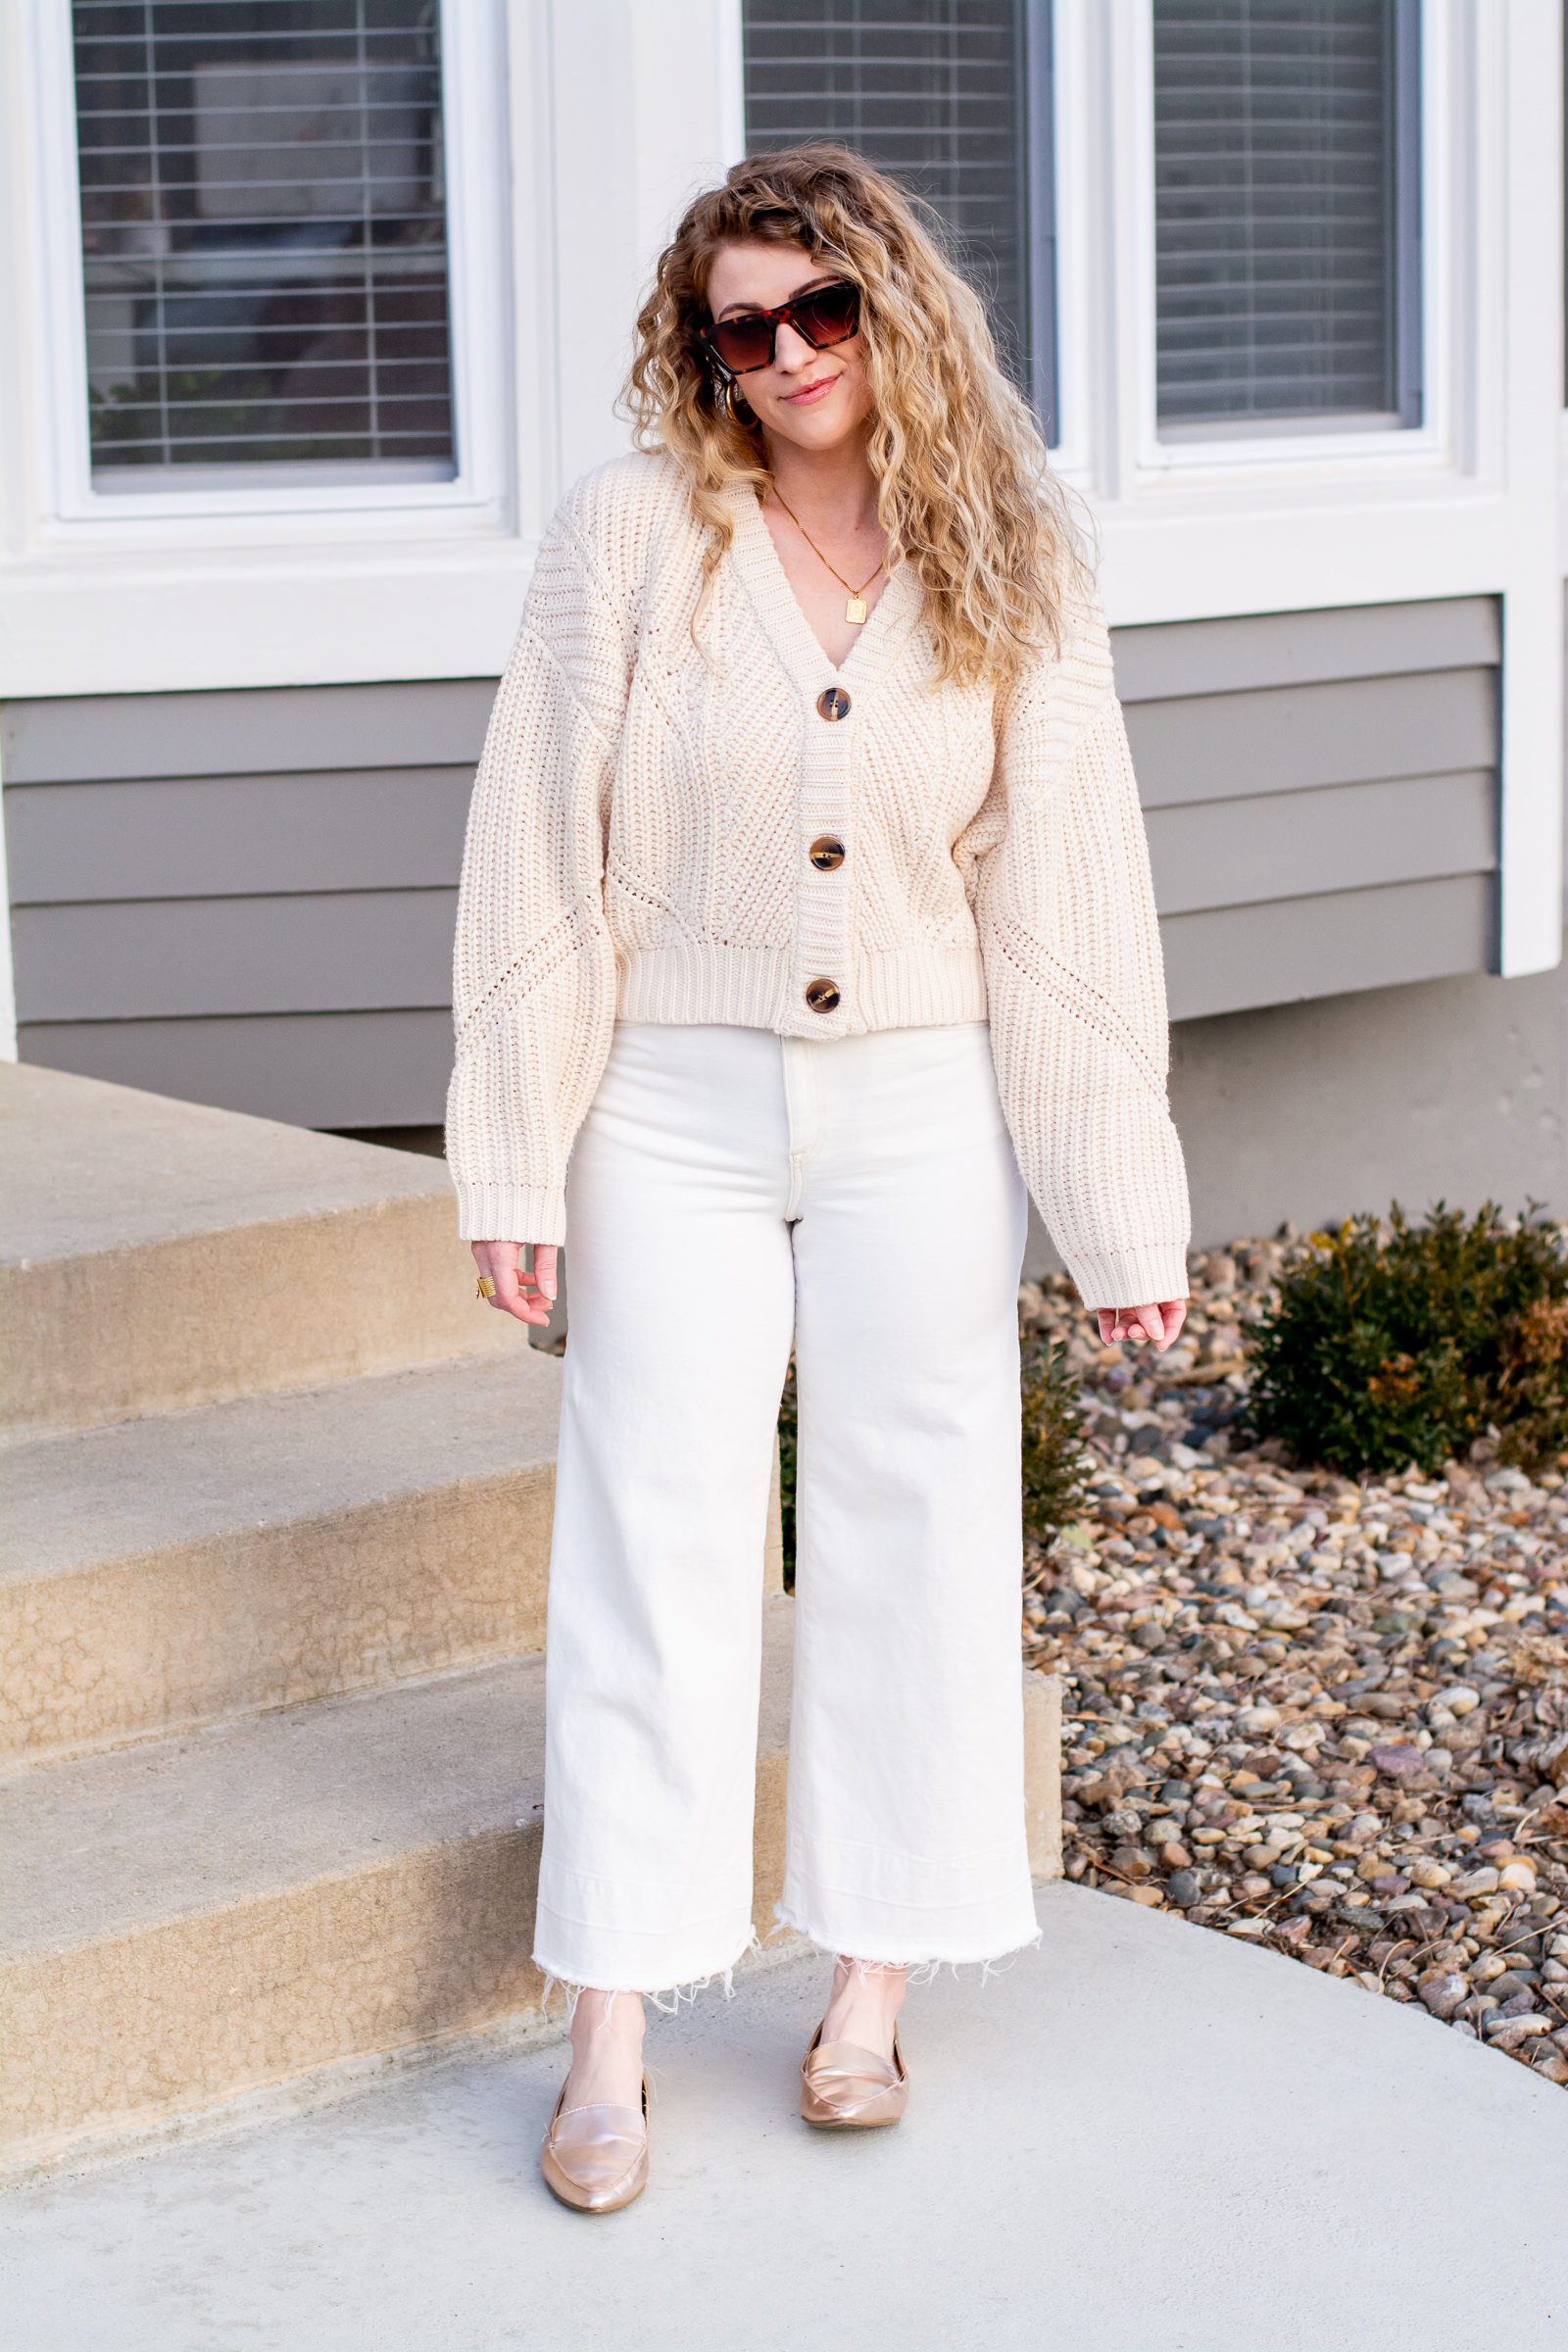 Springtime Neutrals that Keep You Cozy: Cardigan and Culottes. | LSR